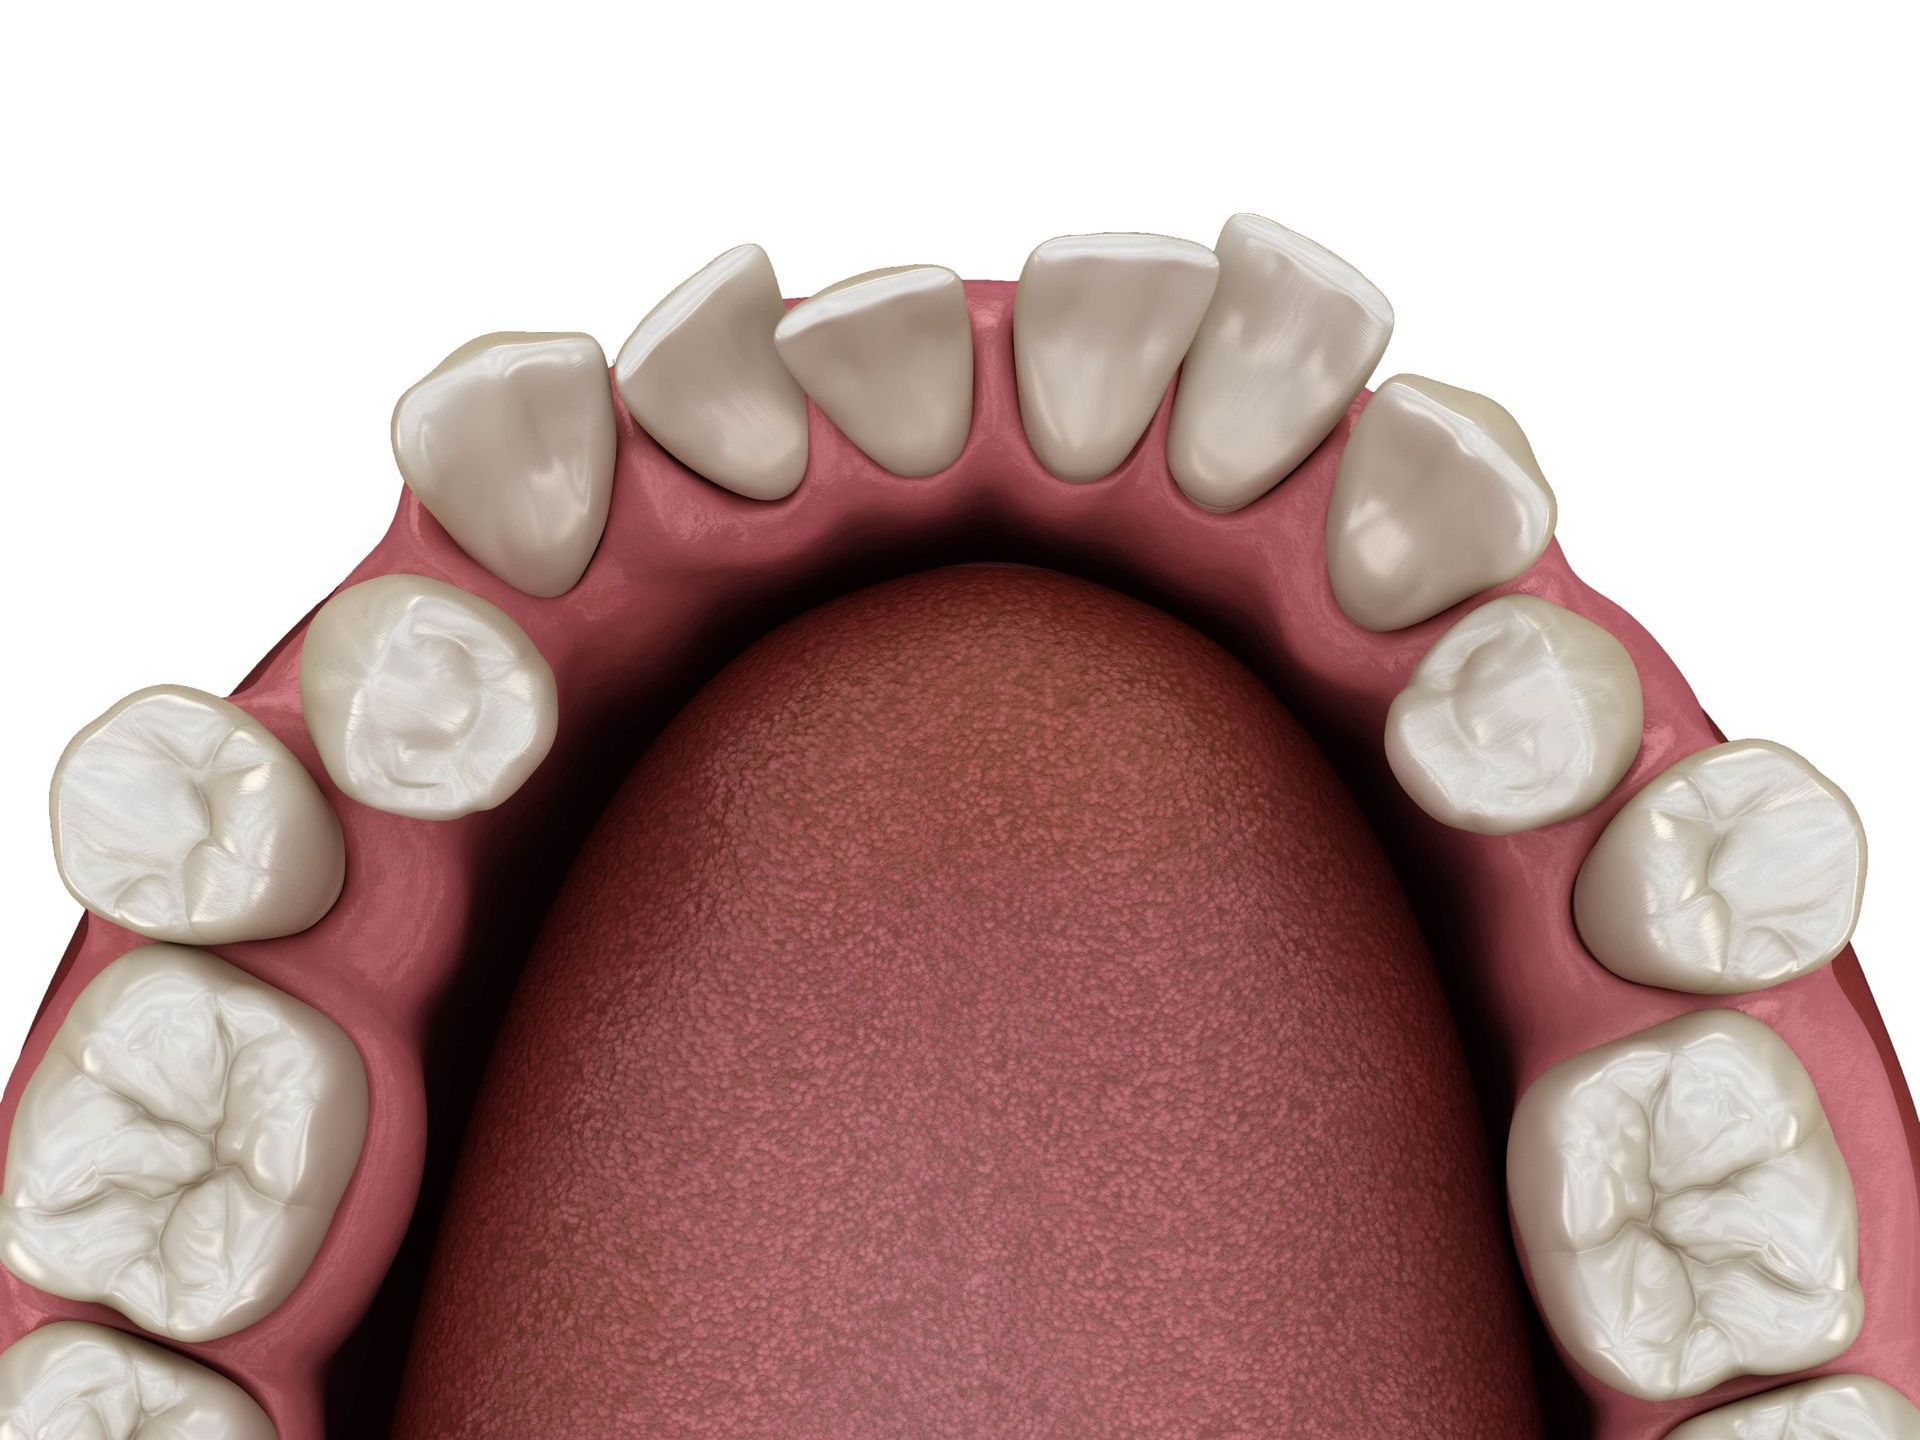 A computer generated image of crowded teeth